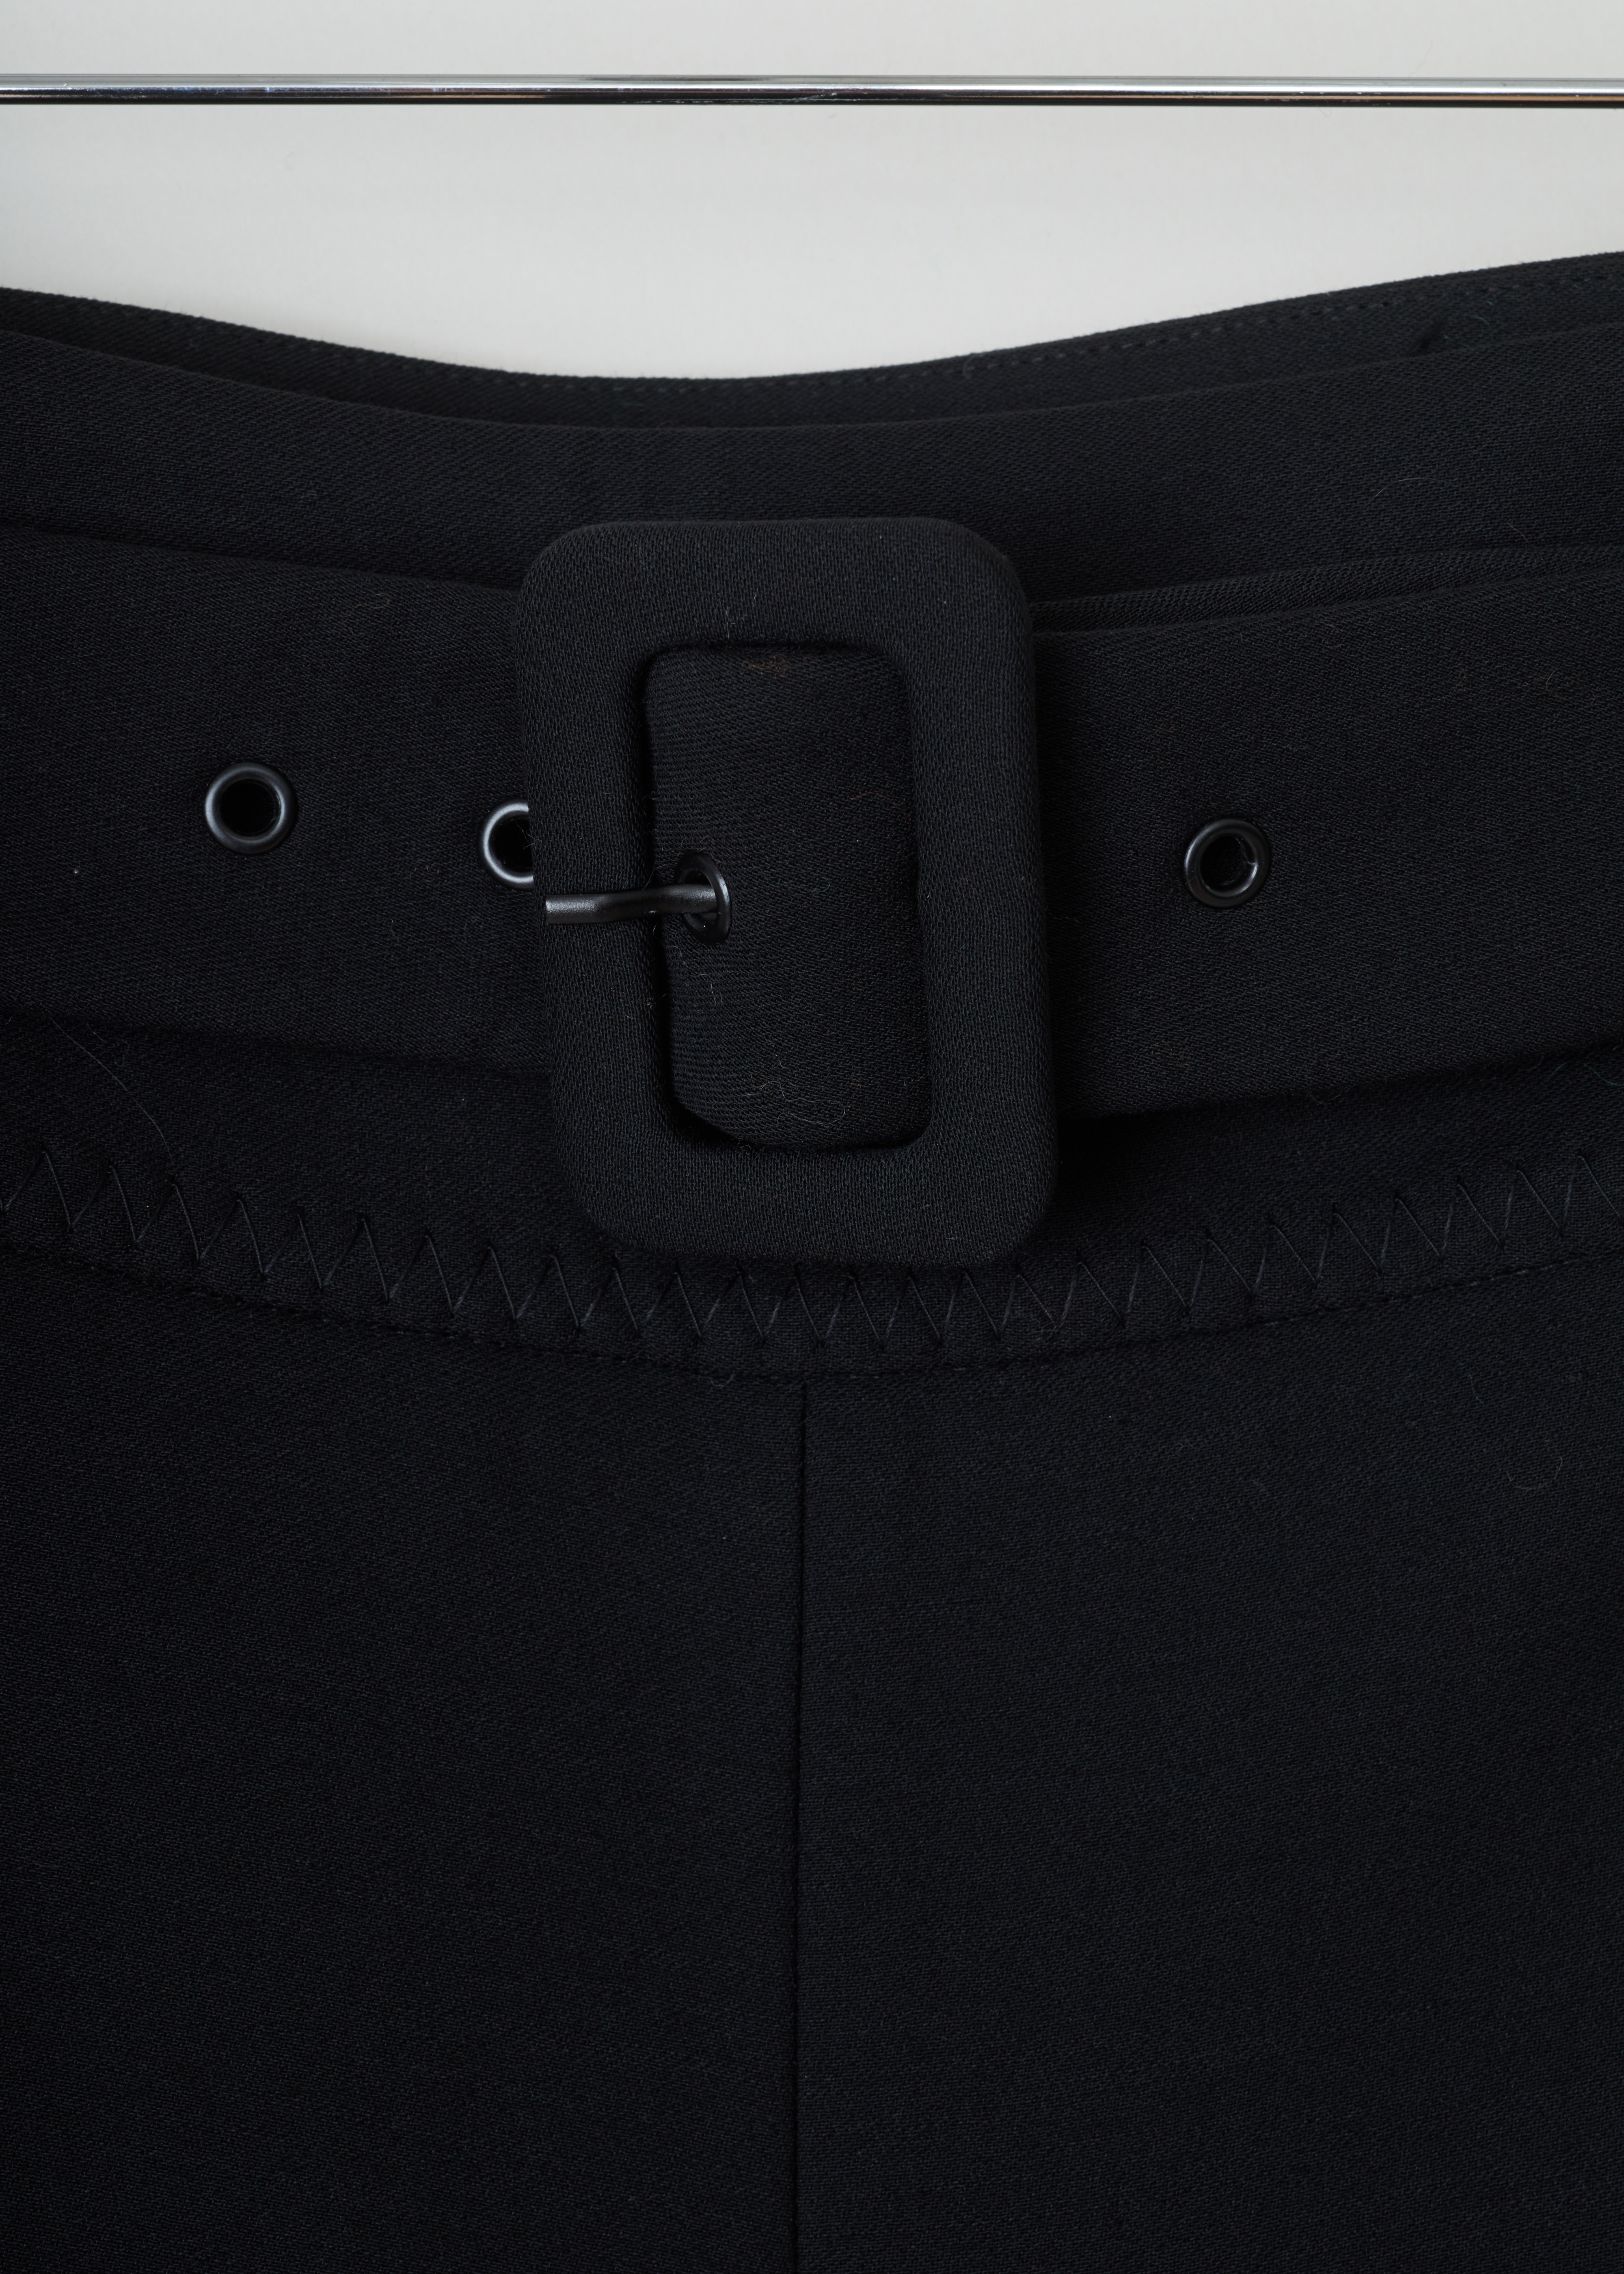 Prada Black belted trousers Natte_Double_Im_P271BH_F0002_Nero detail. Fitted black trousers with a wide waistband with belt loops and a detachable belt in the same fabric, an invisible zipper fastening on the side, centre creases and cuffed hems.